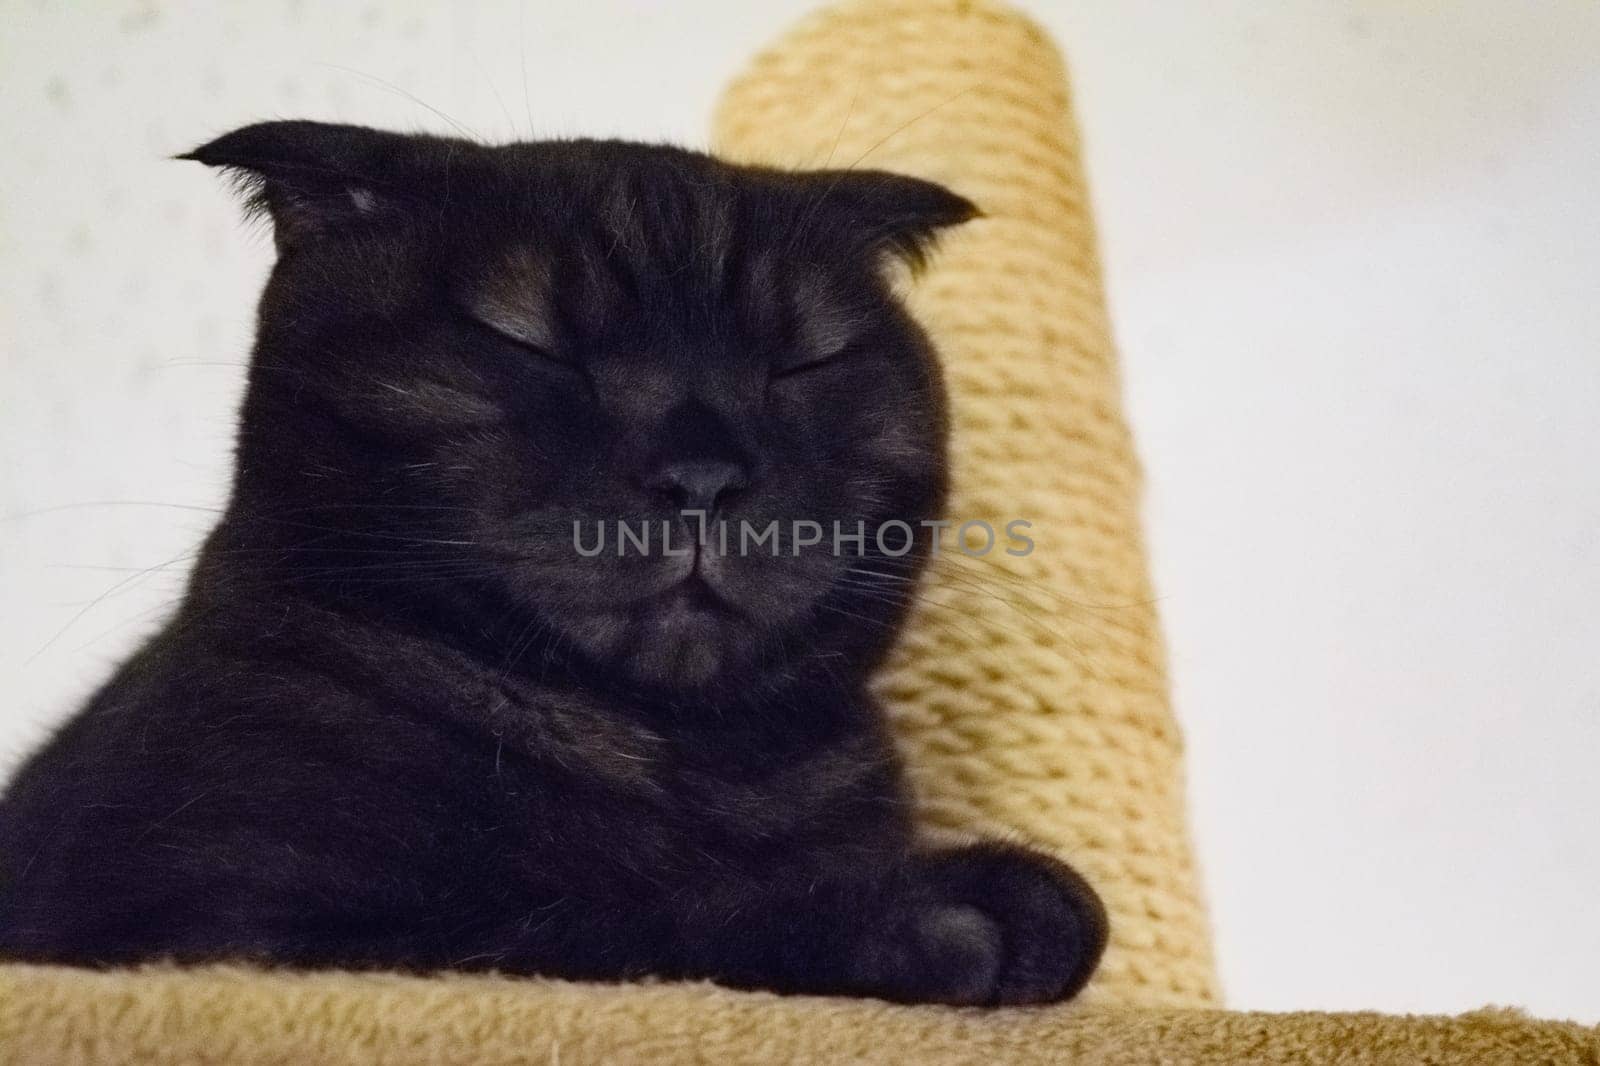 Black cat with resting on a beige surface, eyes closed, looking content and relaxed.